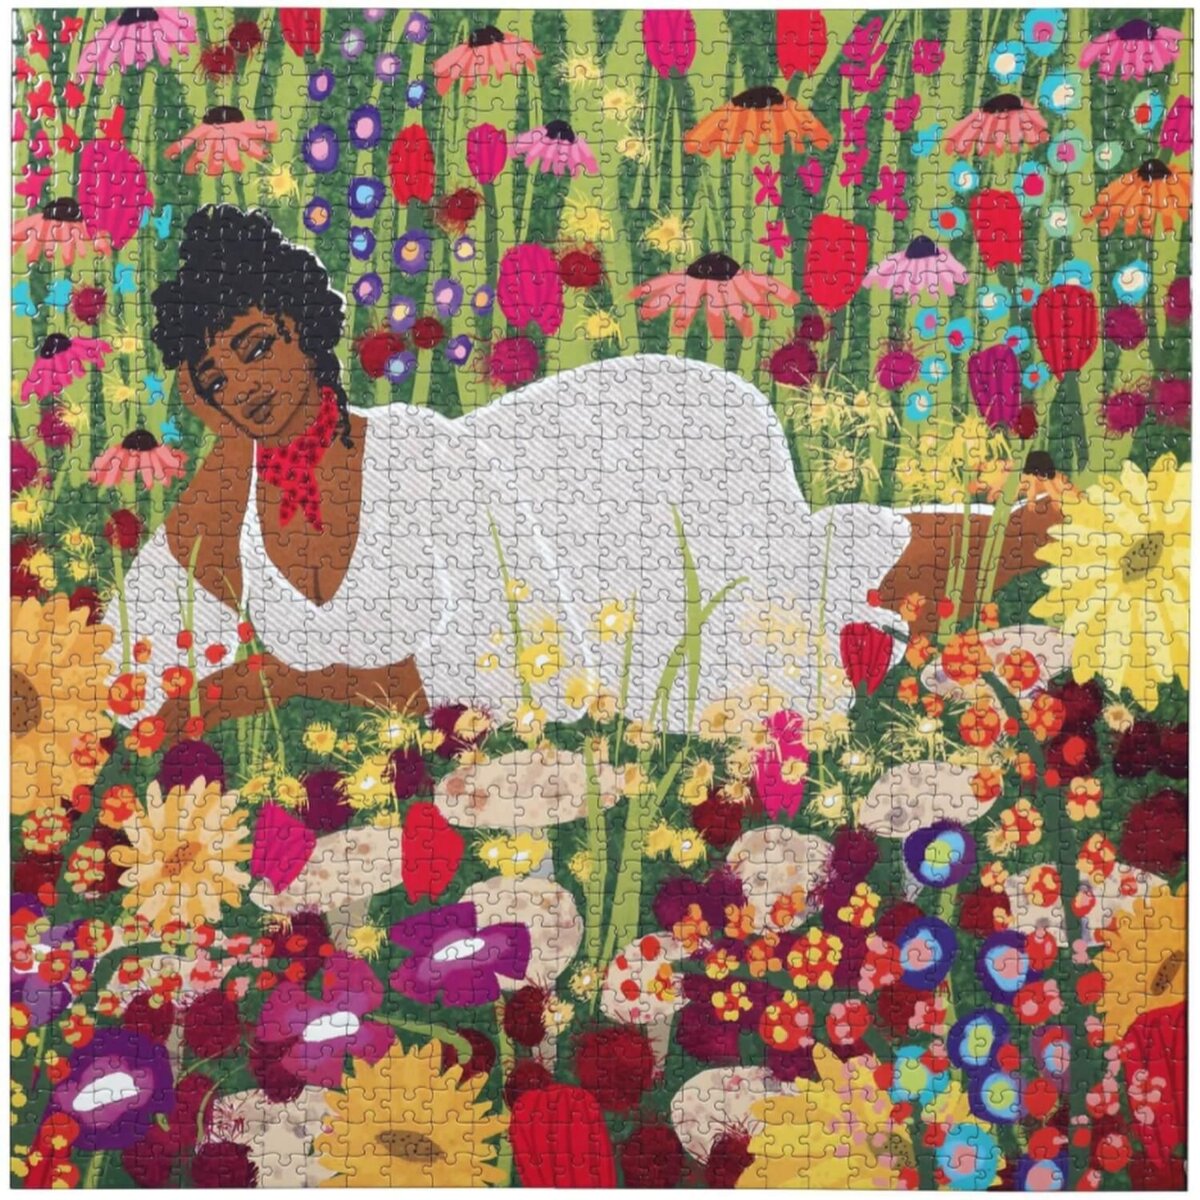 Eeboo Puzzle 1000 pièces : Woman In Flowers